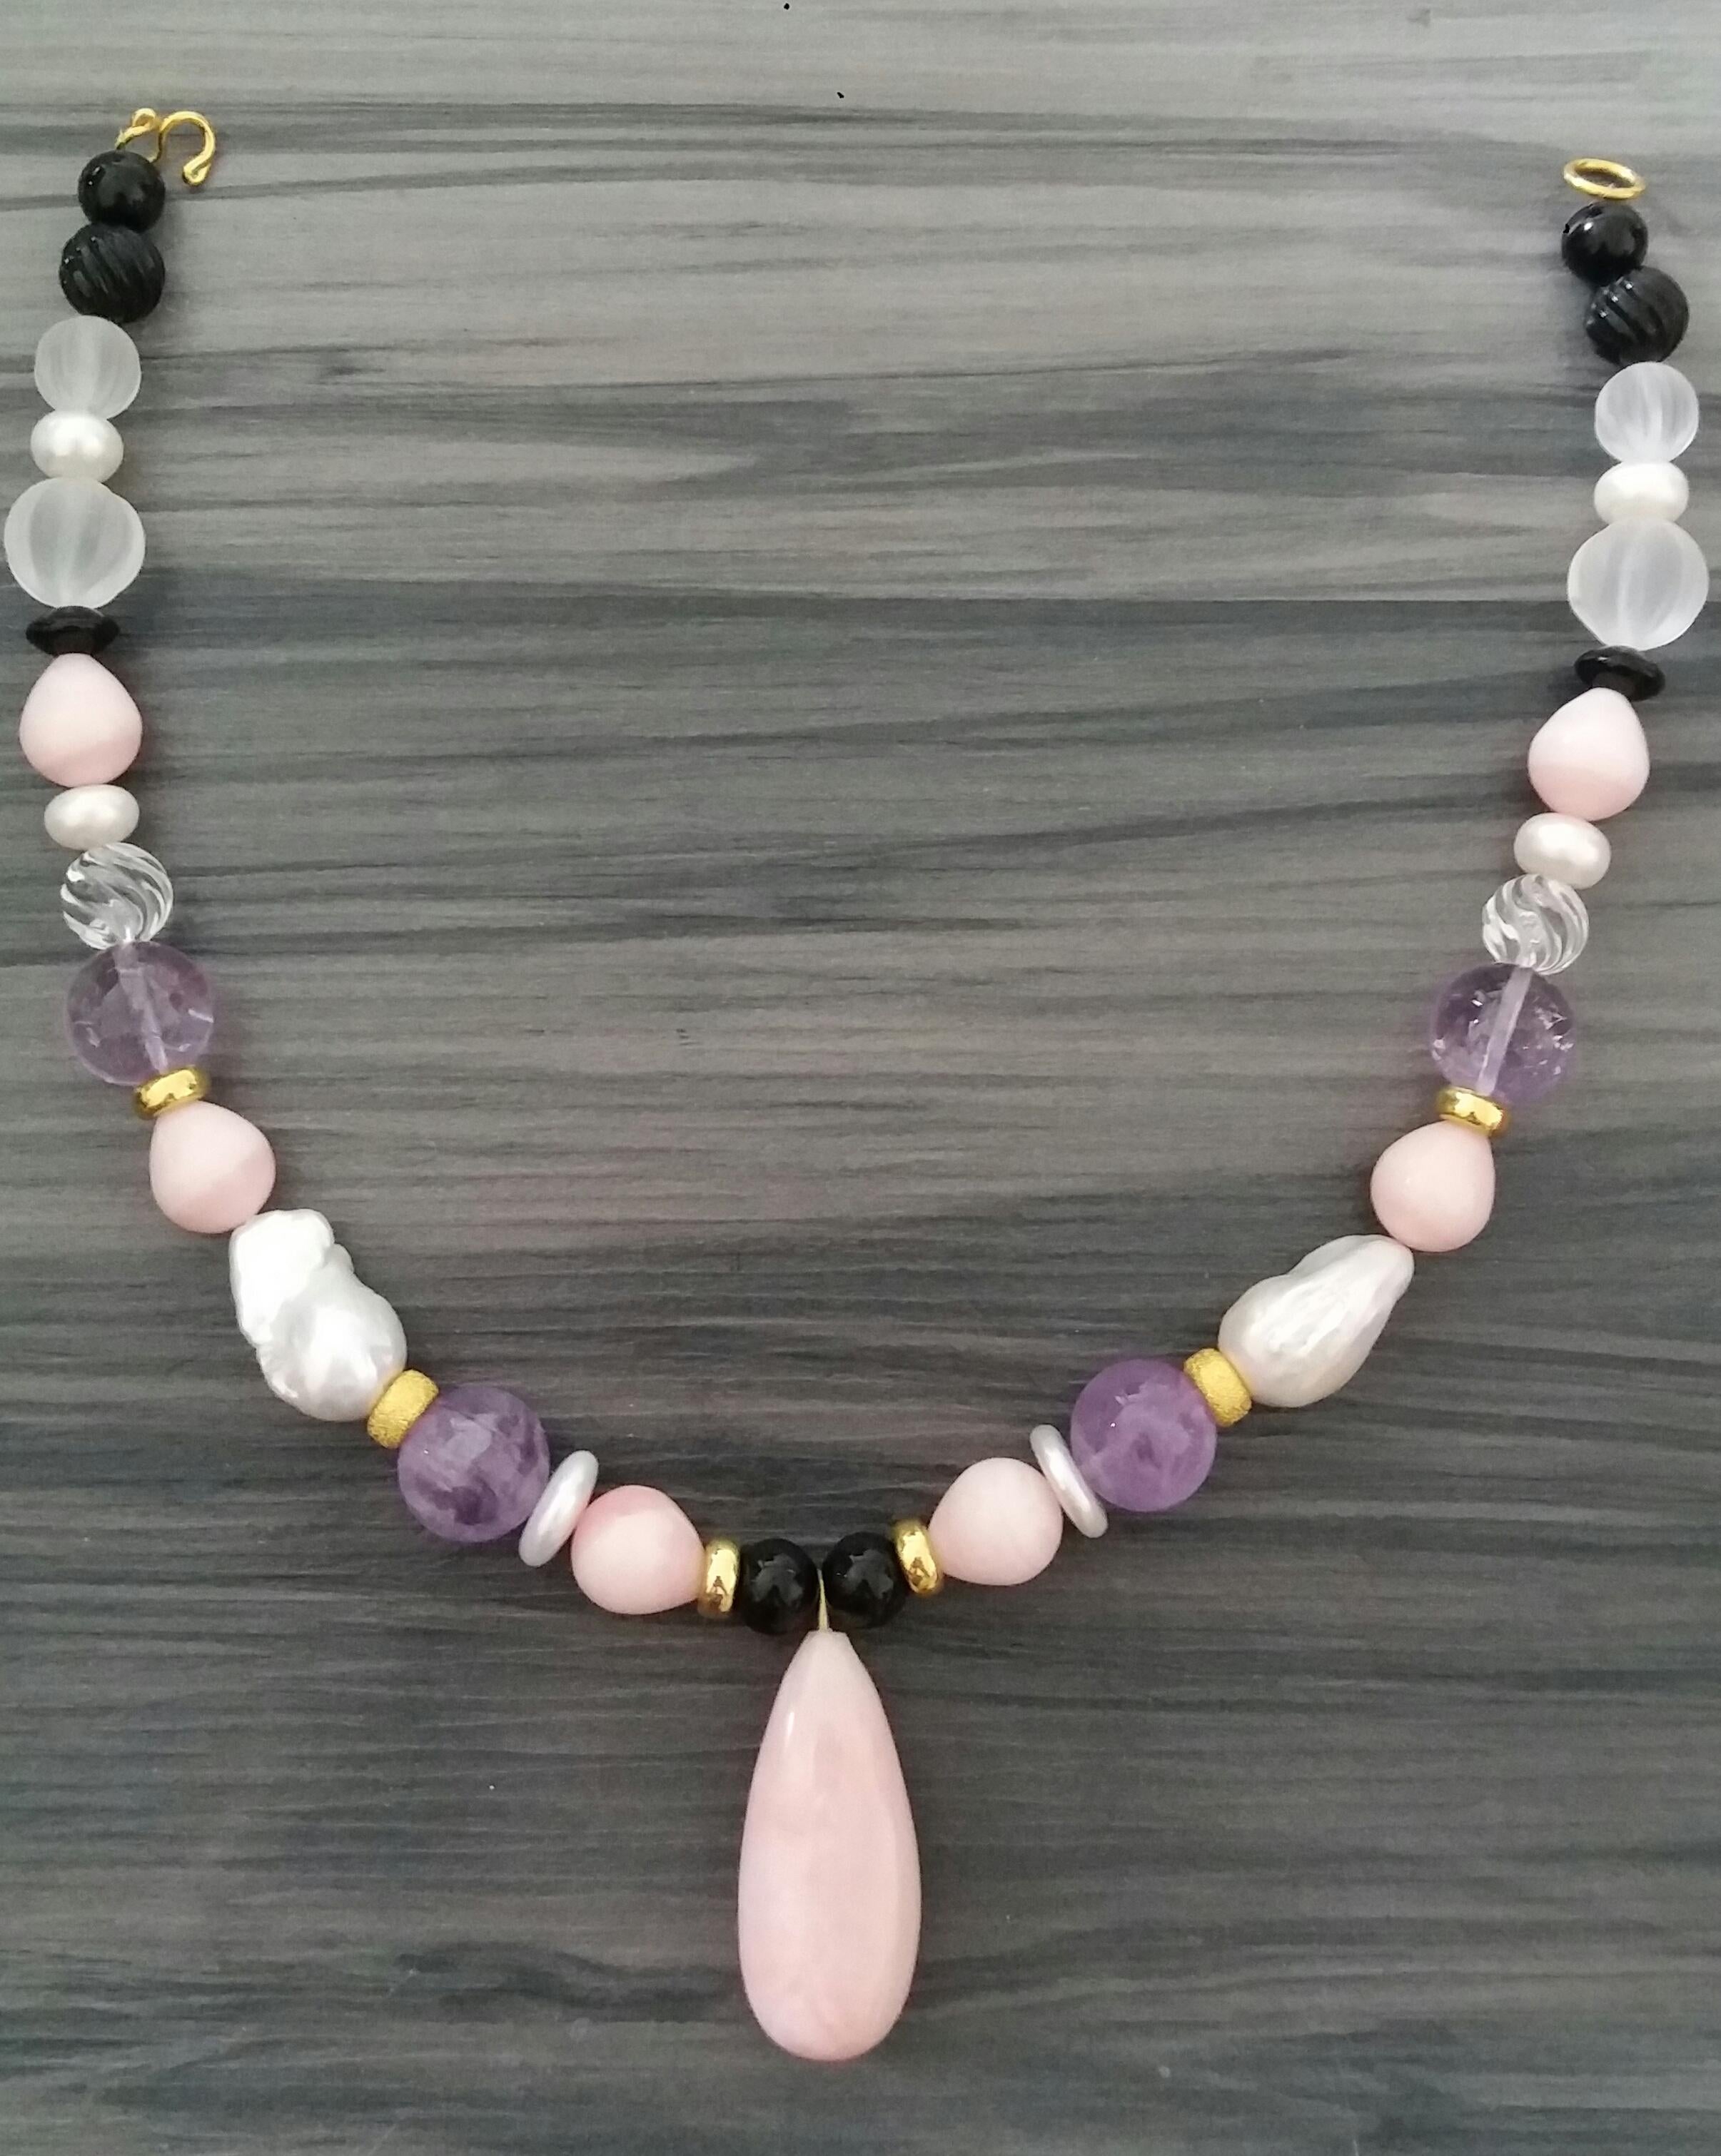 Pink Opal Beads and Pendant Amethyst Pearls Quartz Onyx Yellow Gold Necklace For Sale 4